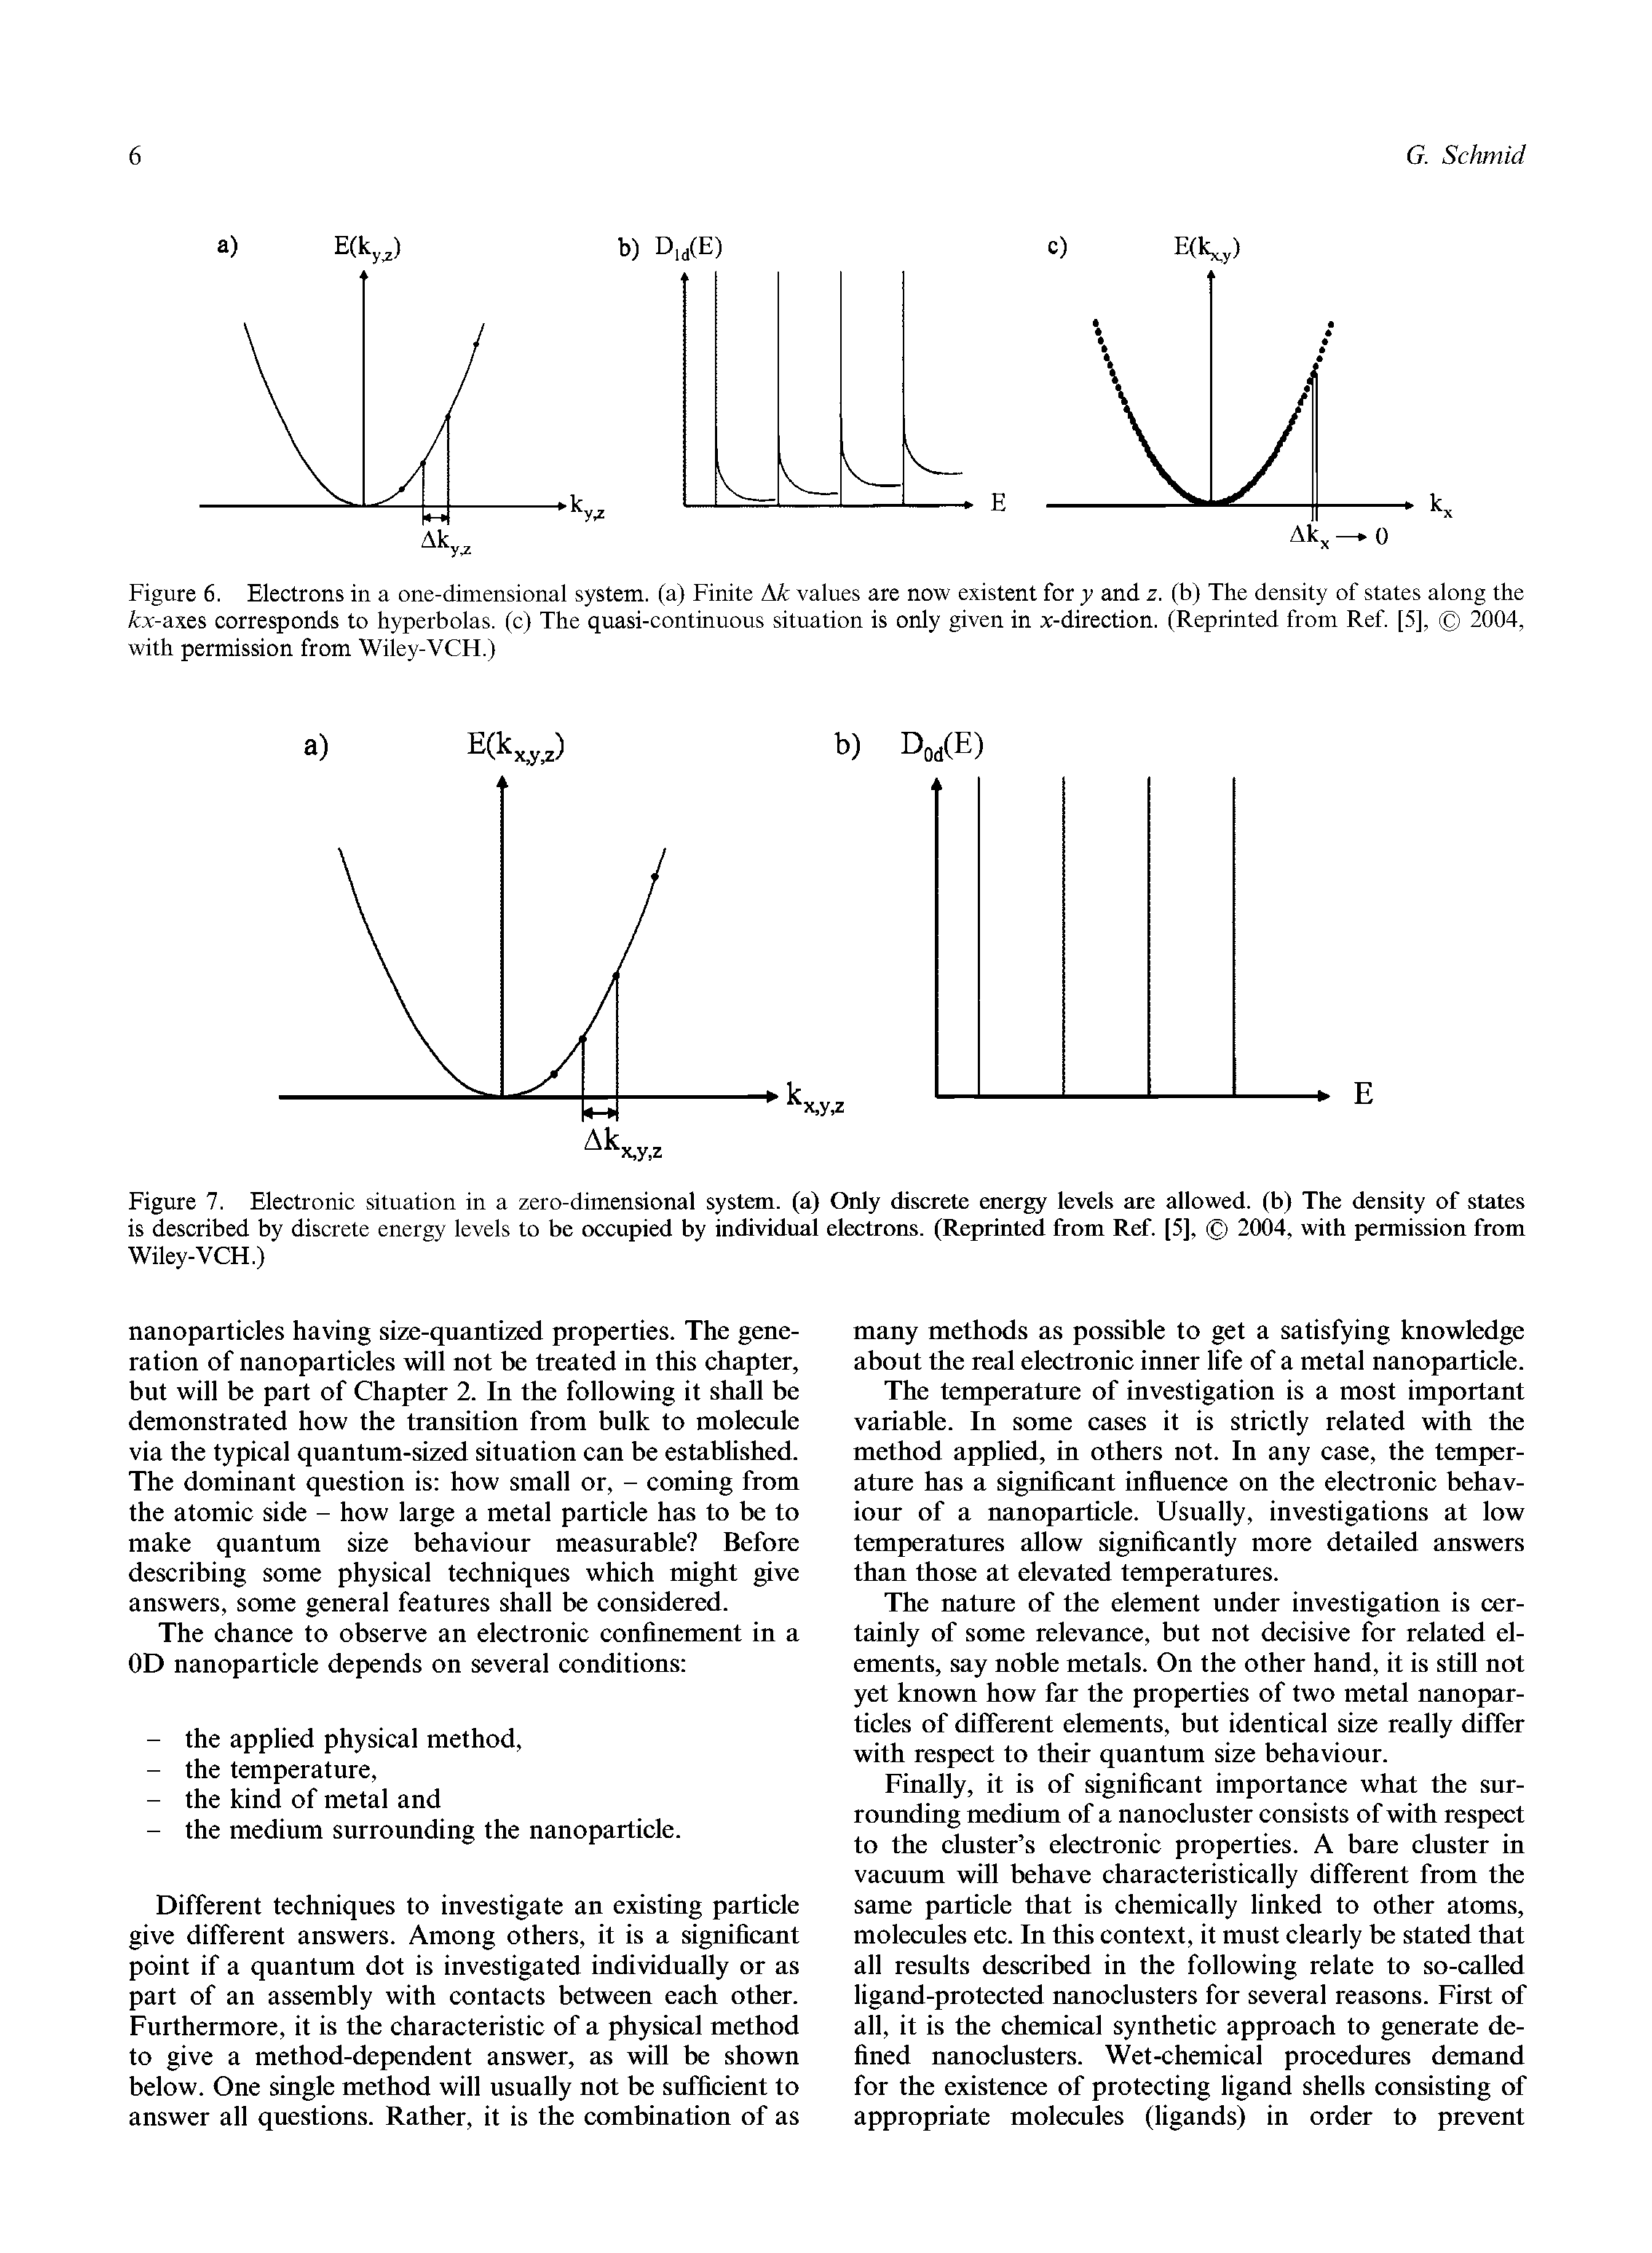 Figure 7. Electronic situation in a zero-dimensional system, (a) Only discrete energy levels are allowed, (b) The density of states is described by discrete energy levels to be occupied by individual electrons. (Reprinted from Ref. [5], 2004, with permission from Wiley-VCH.)...